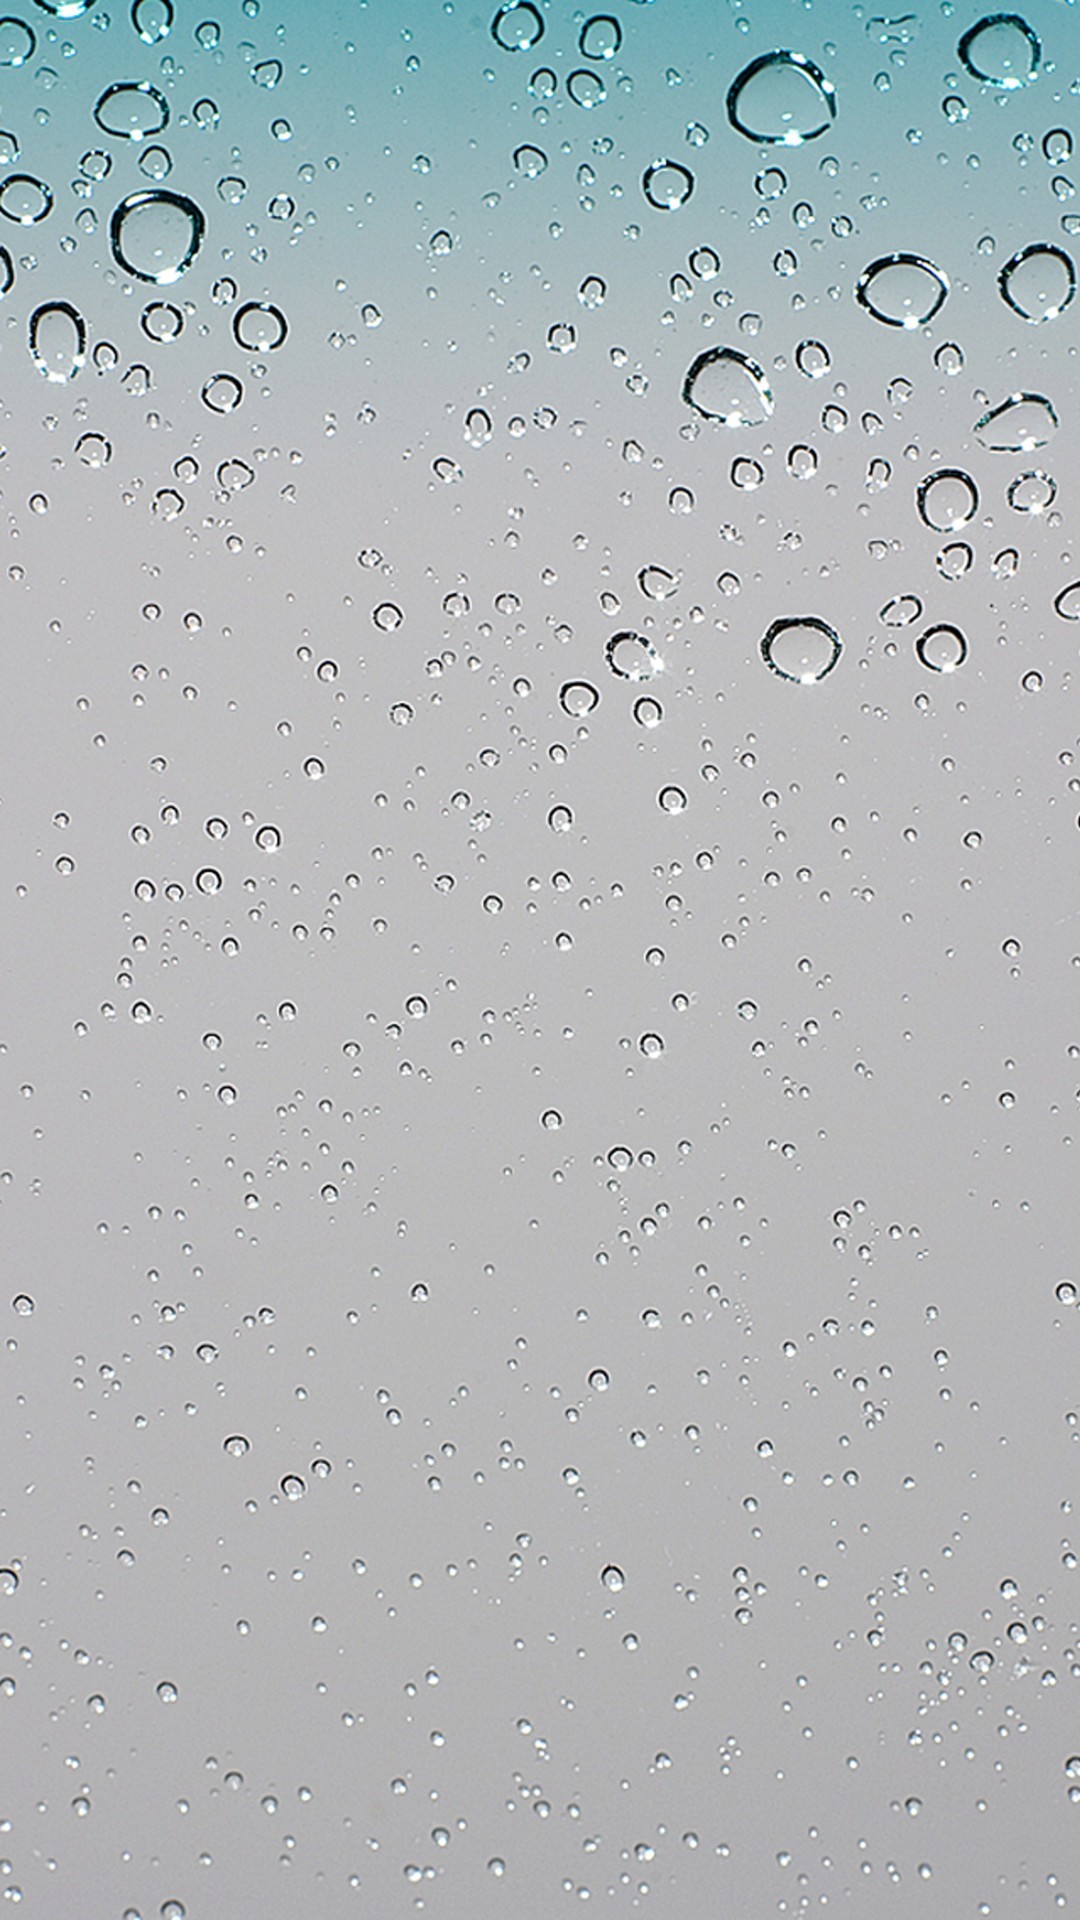 1080x1920 ... Classic Water Droplets ...